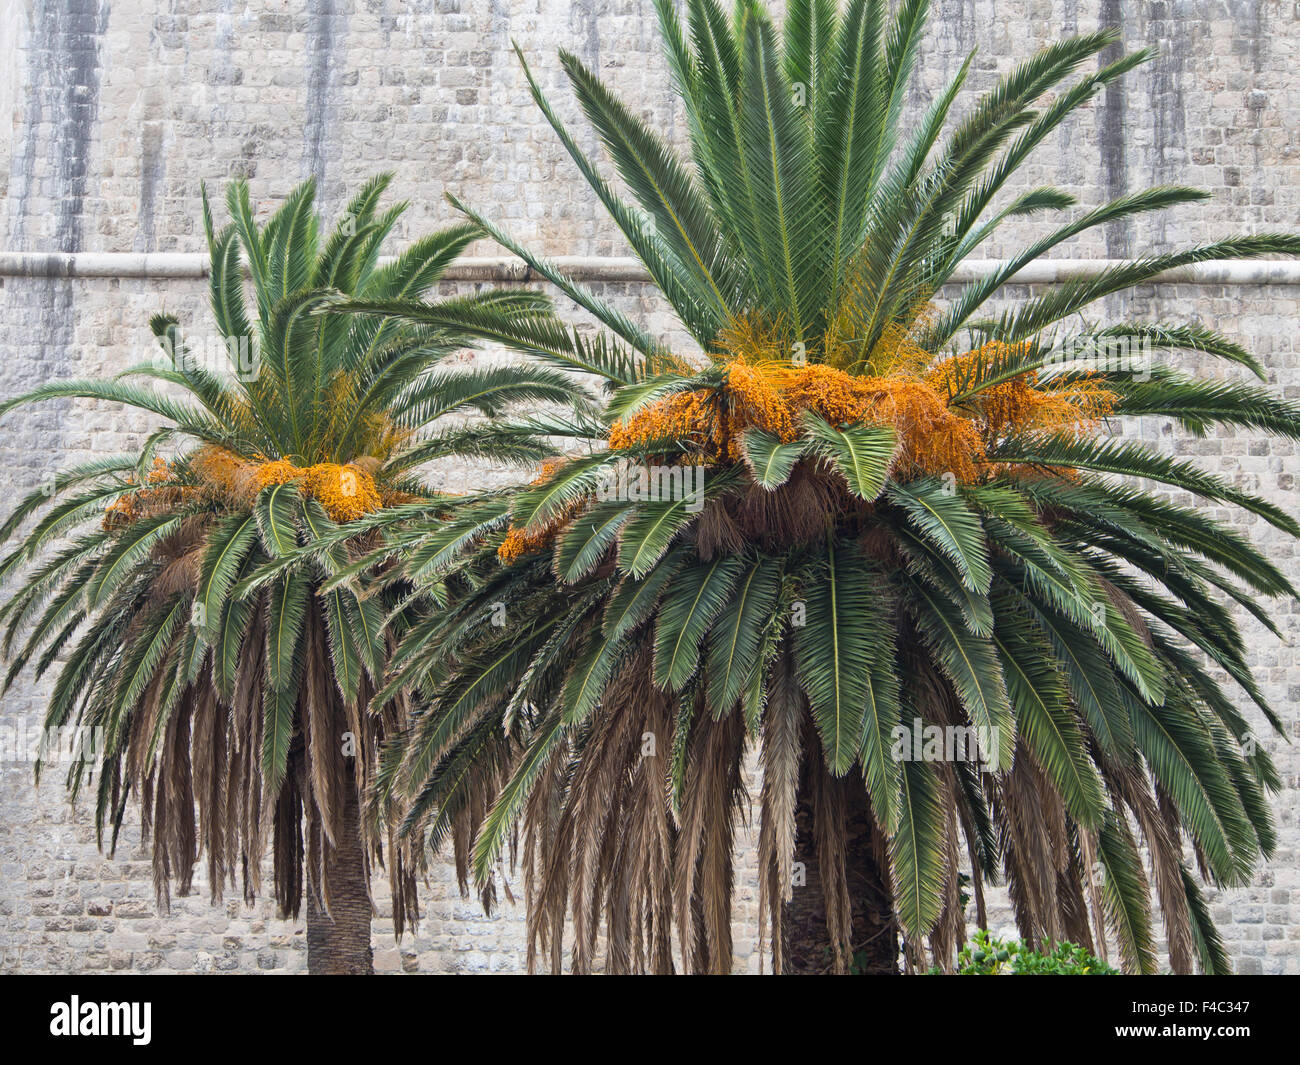 Date palms against the fortification walls of Dubrovnik Croatia Stock Photo